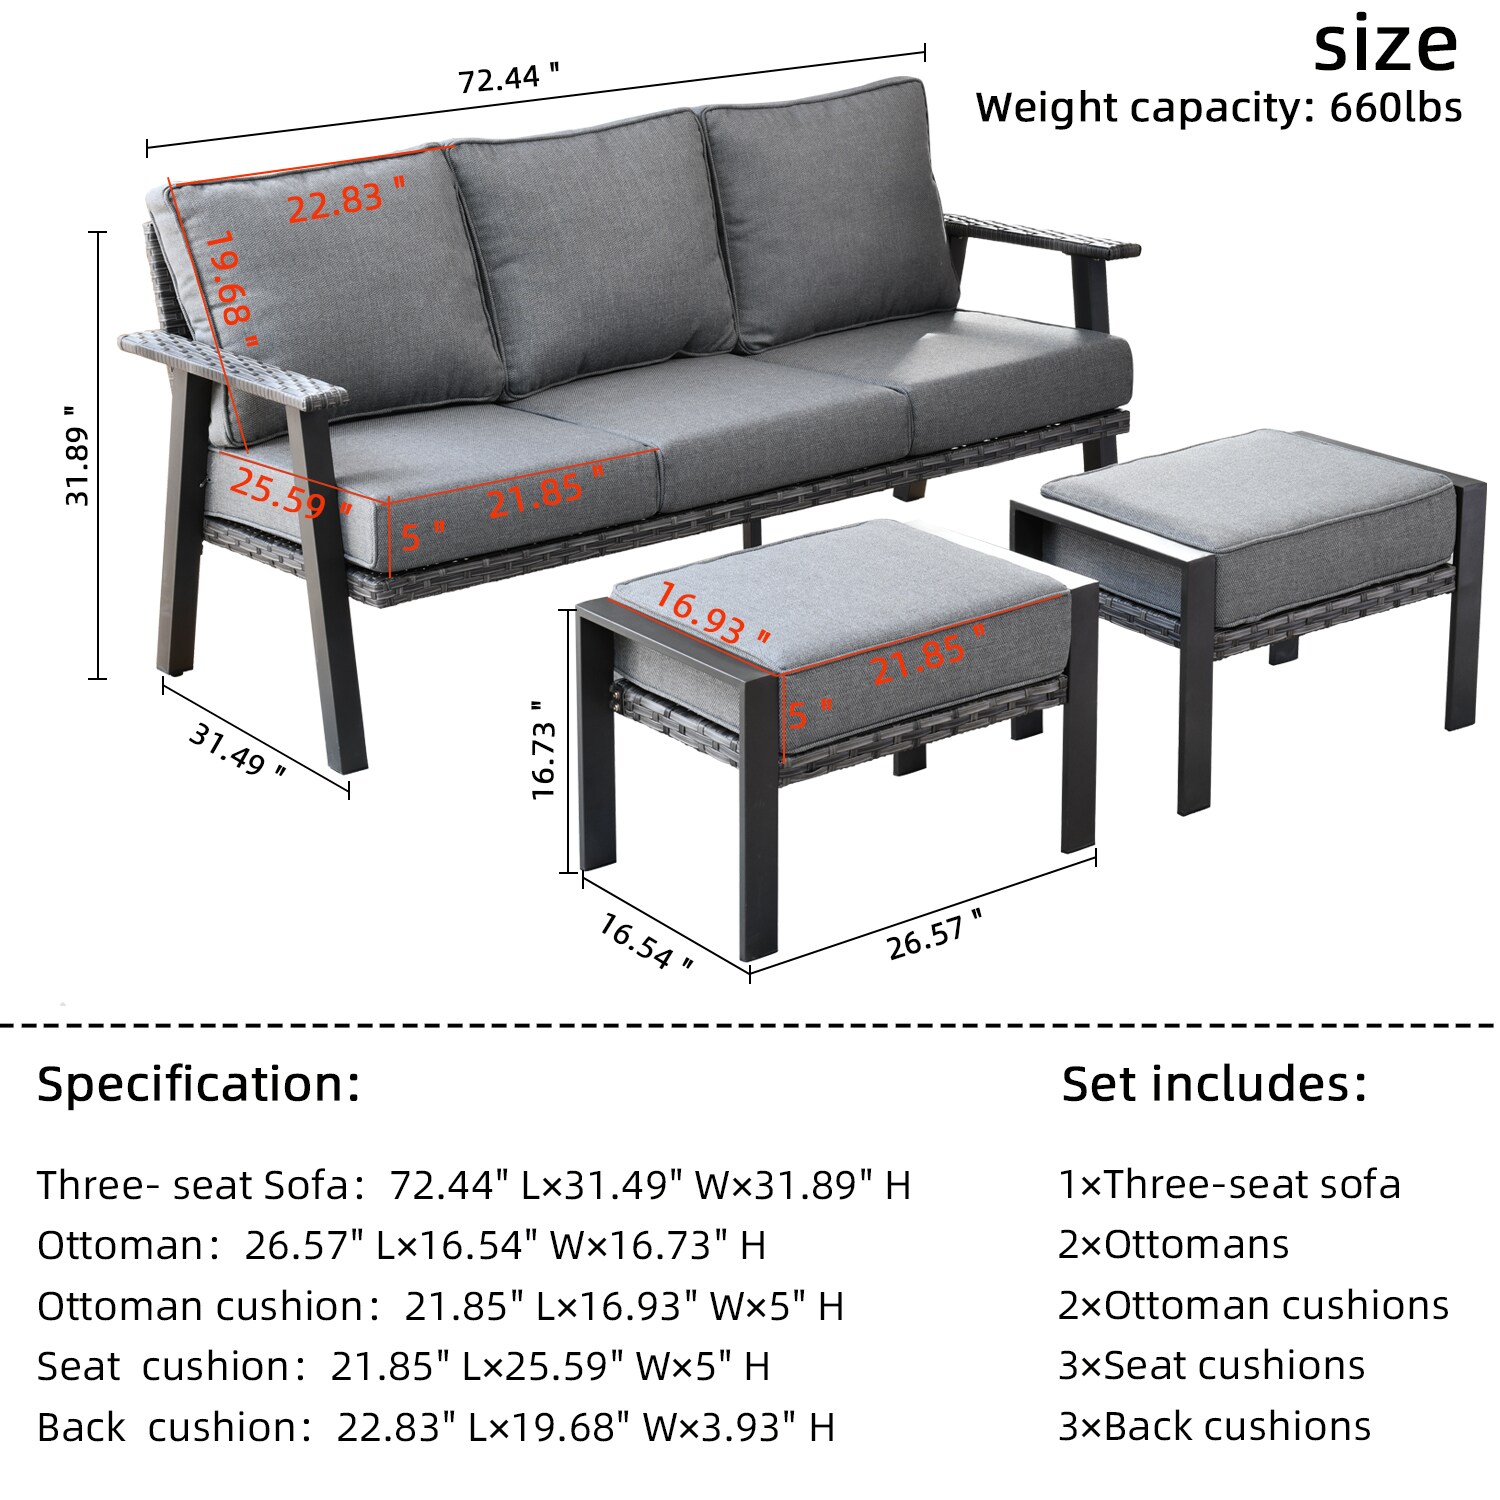 XIZZI Pisces Wicker Outdoor Sofa with Gray Cushion(S) and Steel Frame ...